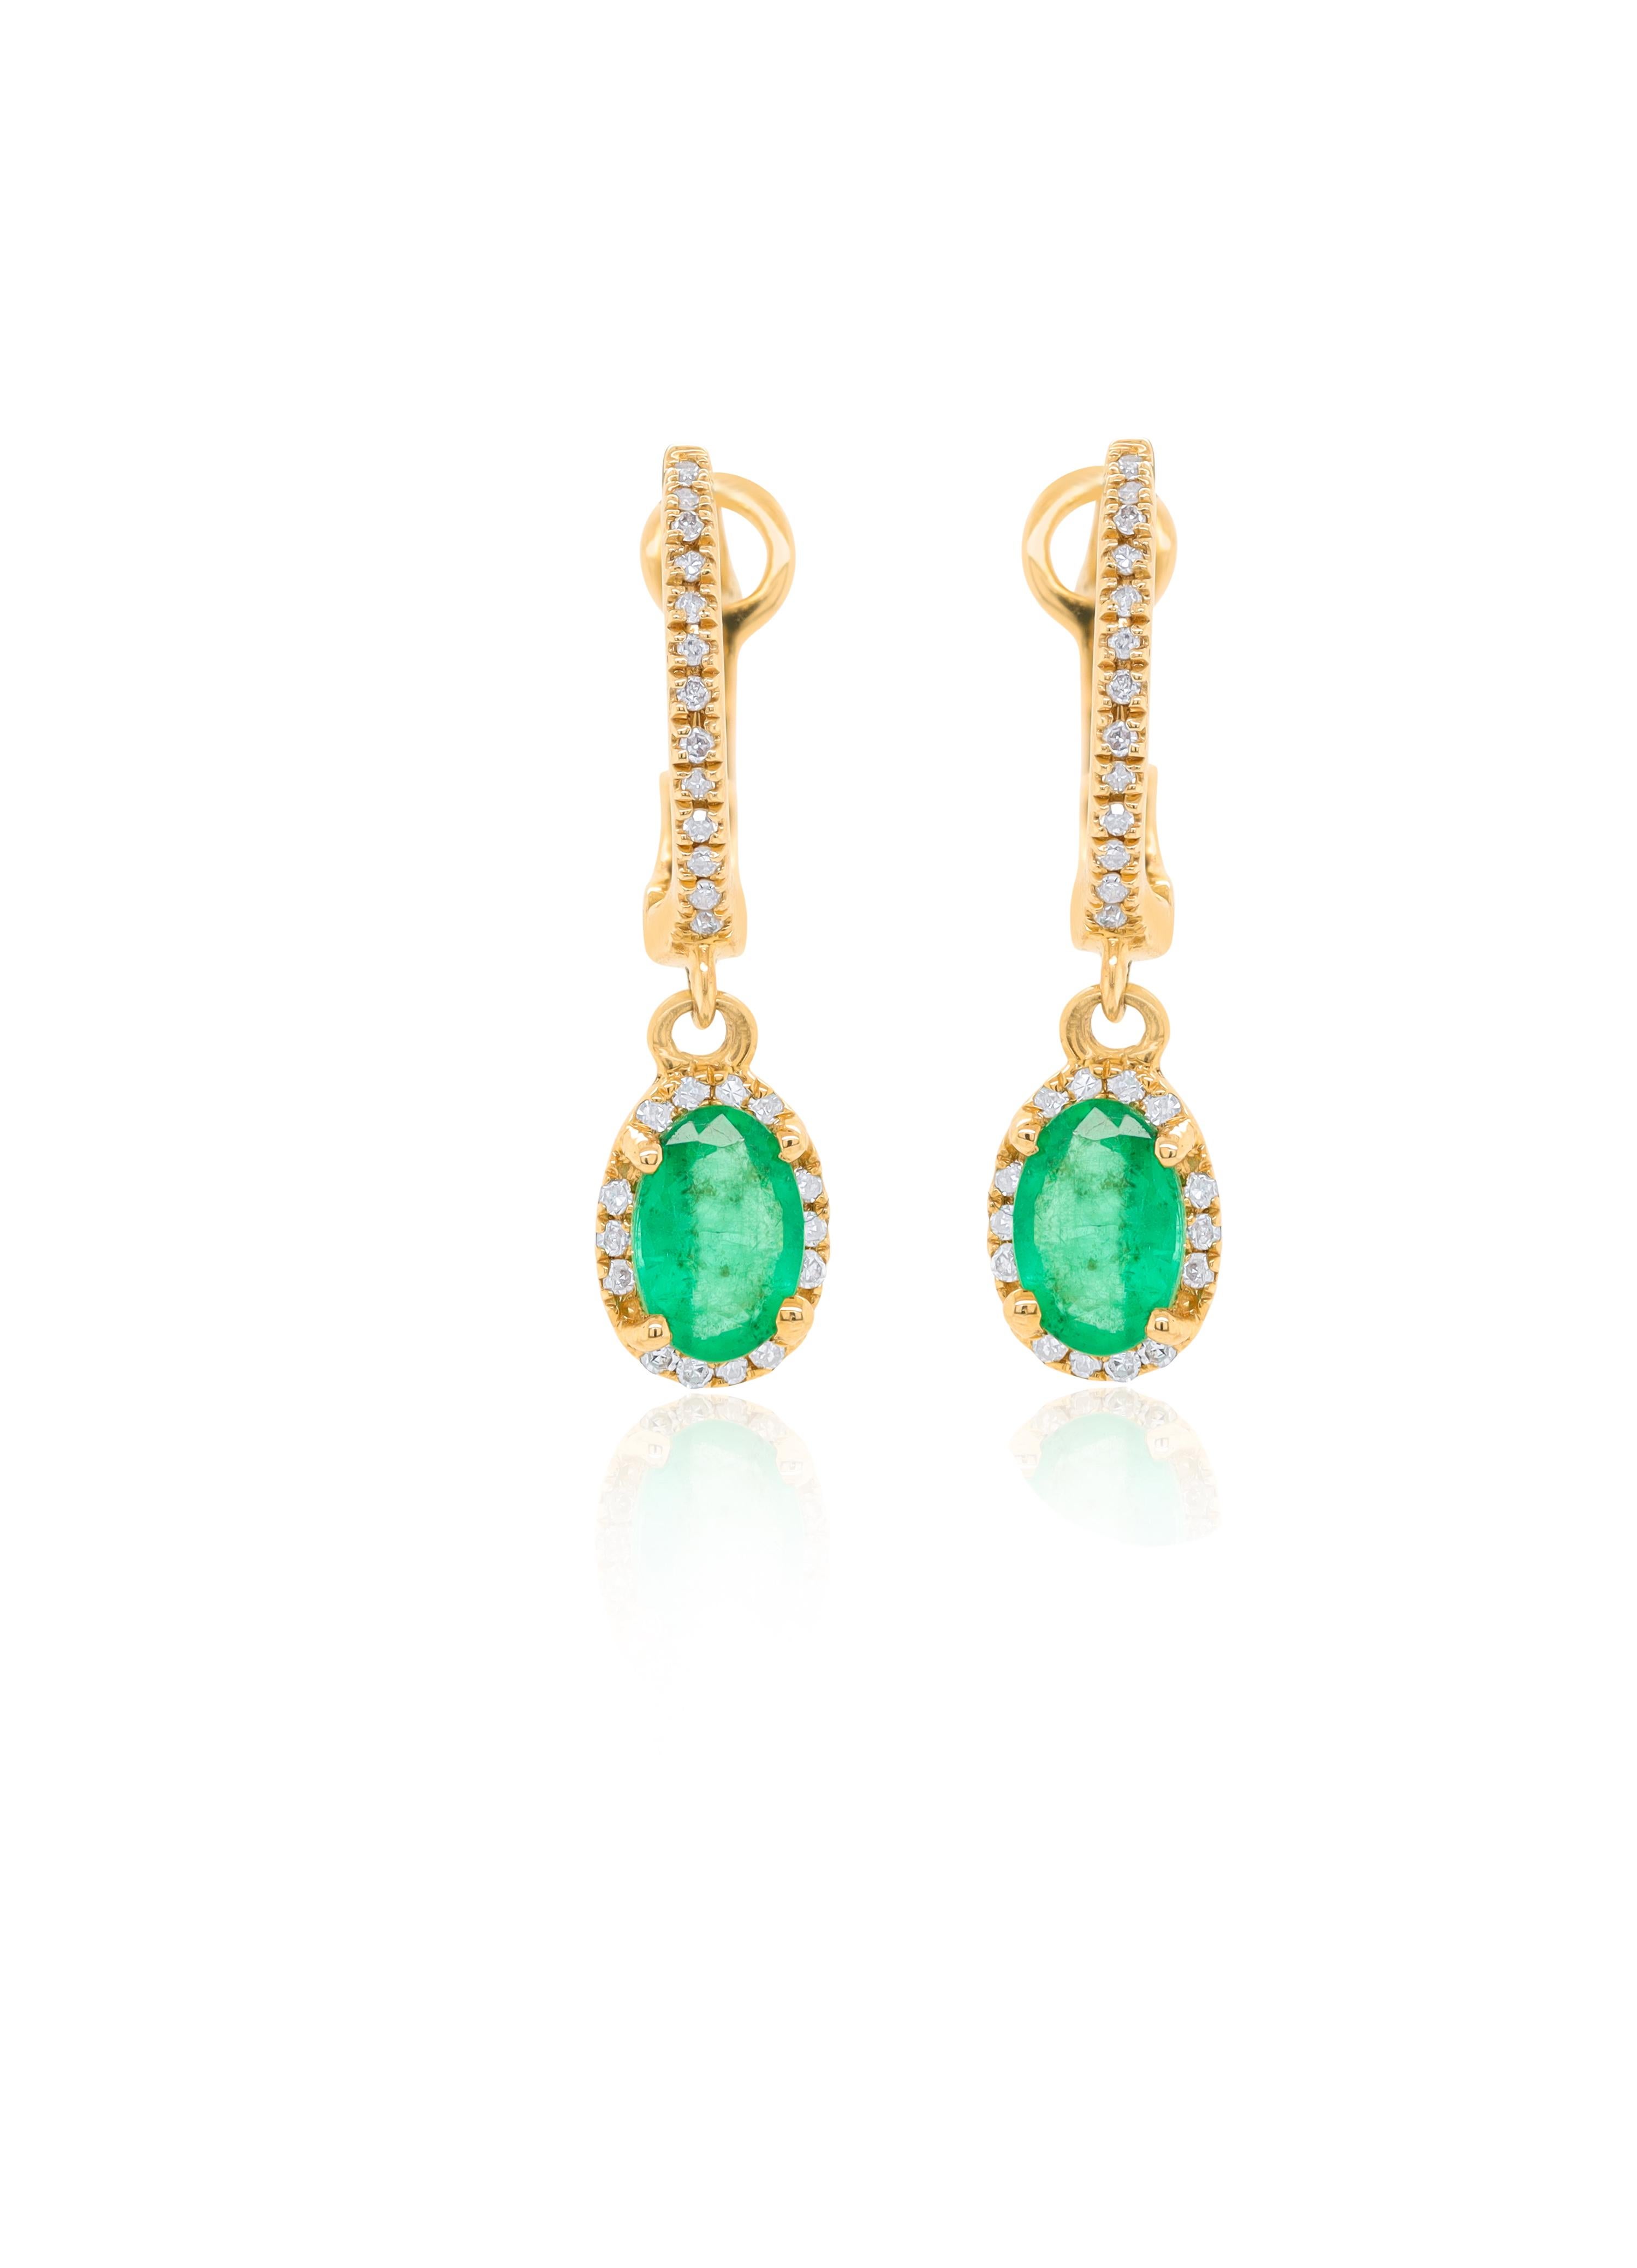 14K Yellow Gold Emerald and Diamond Earrings featuring 0.95 Carat T.W. of Natural Green Emeralds and 0.15 Carats T.W. of Diamonds

Underline your look with this sharp 14K White Gold Diamond and Emerald Earrings. High quality Diamonds and emeralds.